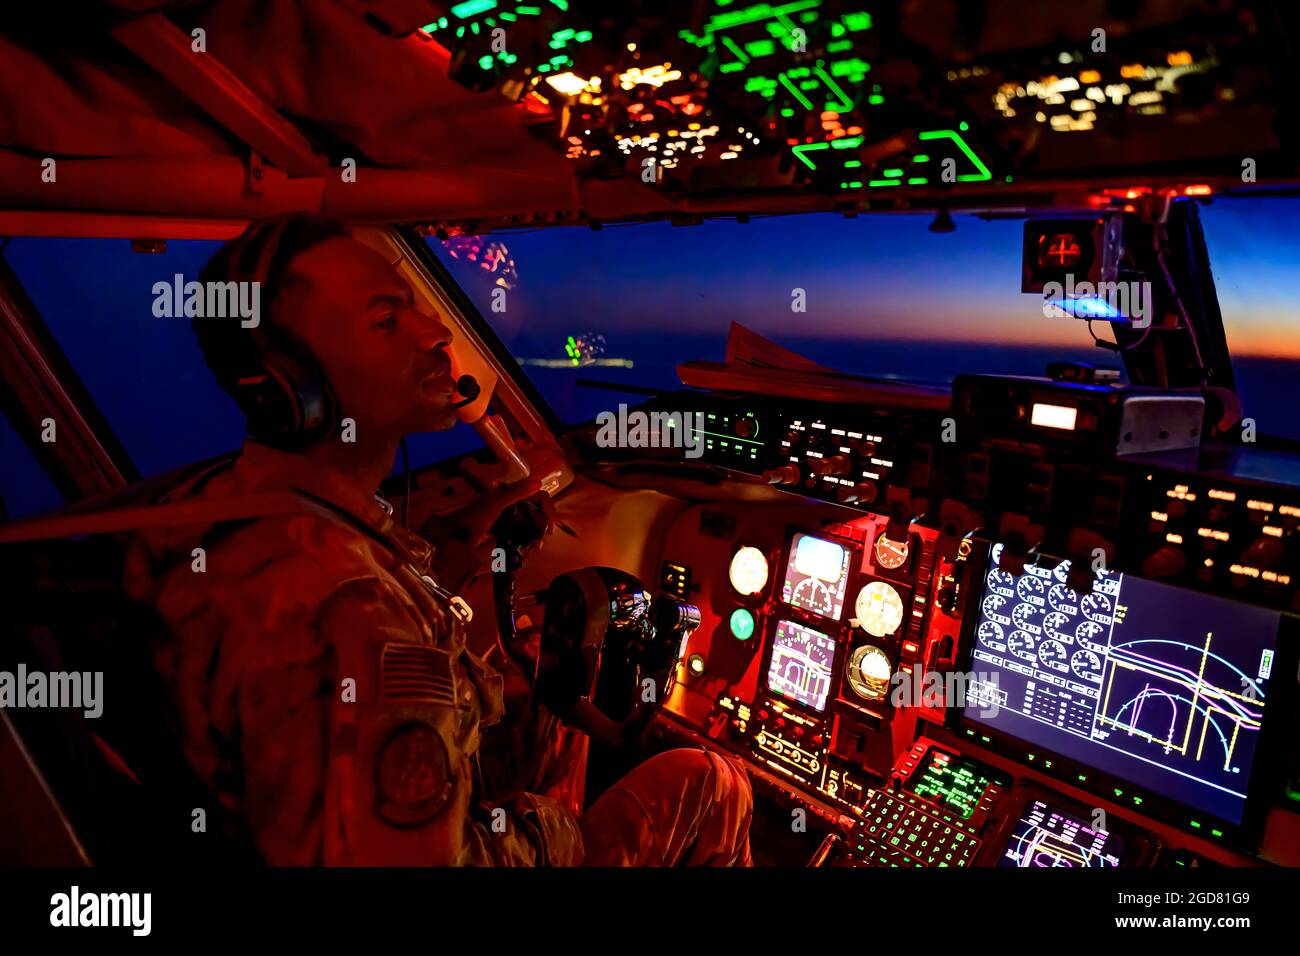 A KC-135 Stratotanker aircraft pilot from the 350th Expeditionary Aerial Refueling Squadron prepares to refuel F/A-18D Hornet aircraft during a mission supporting a dynamic force employment over the U.S. Central Command area of responsibility, May 18, 2021. DFEs enhance Central Command’s ability to deter aggression and promote security and stability within the area of responsibility. (U.S. Air Force photo by Tech. Sgt. Robert Harnden) Stock Photo